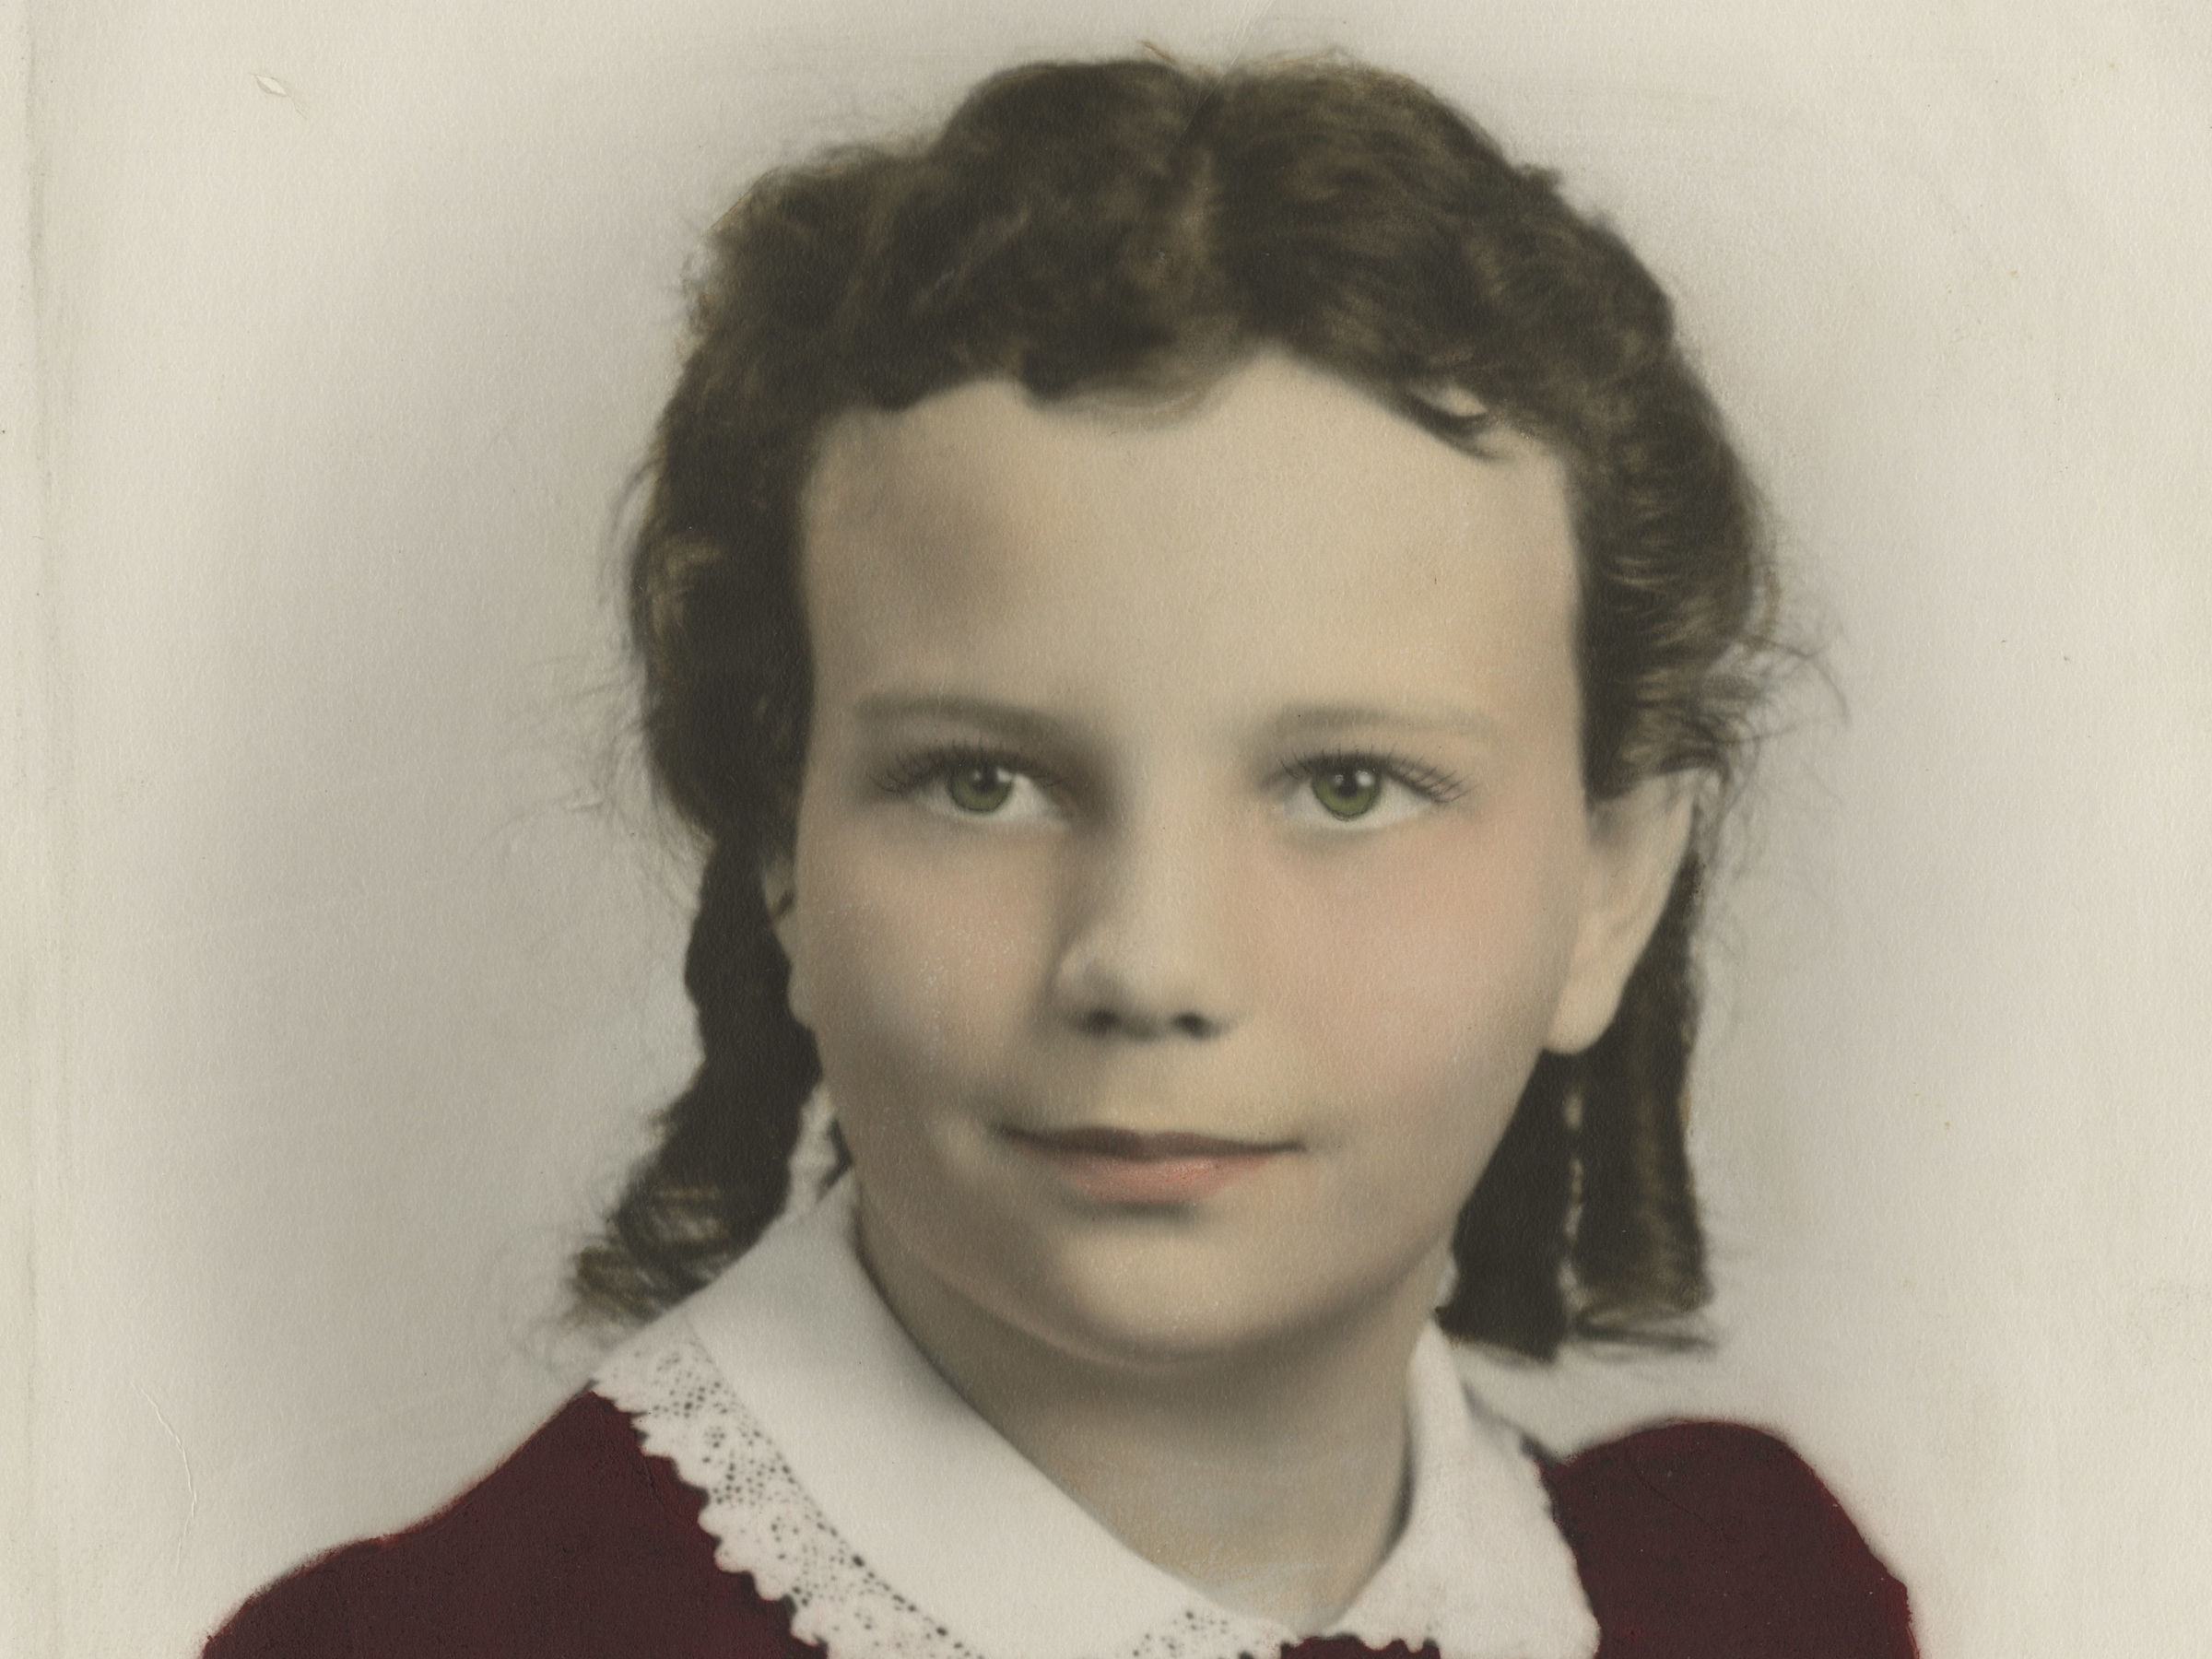 archived portrait of Sandra Day O'Connor as a child